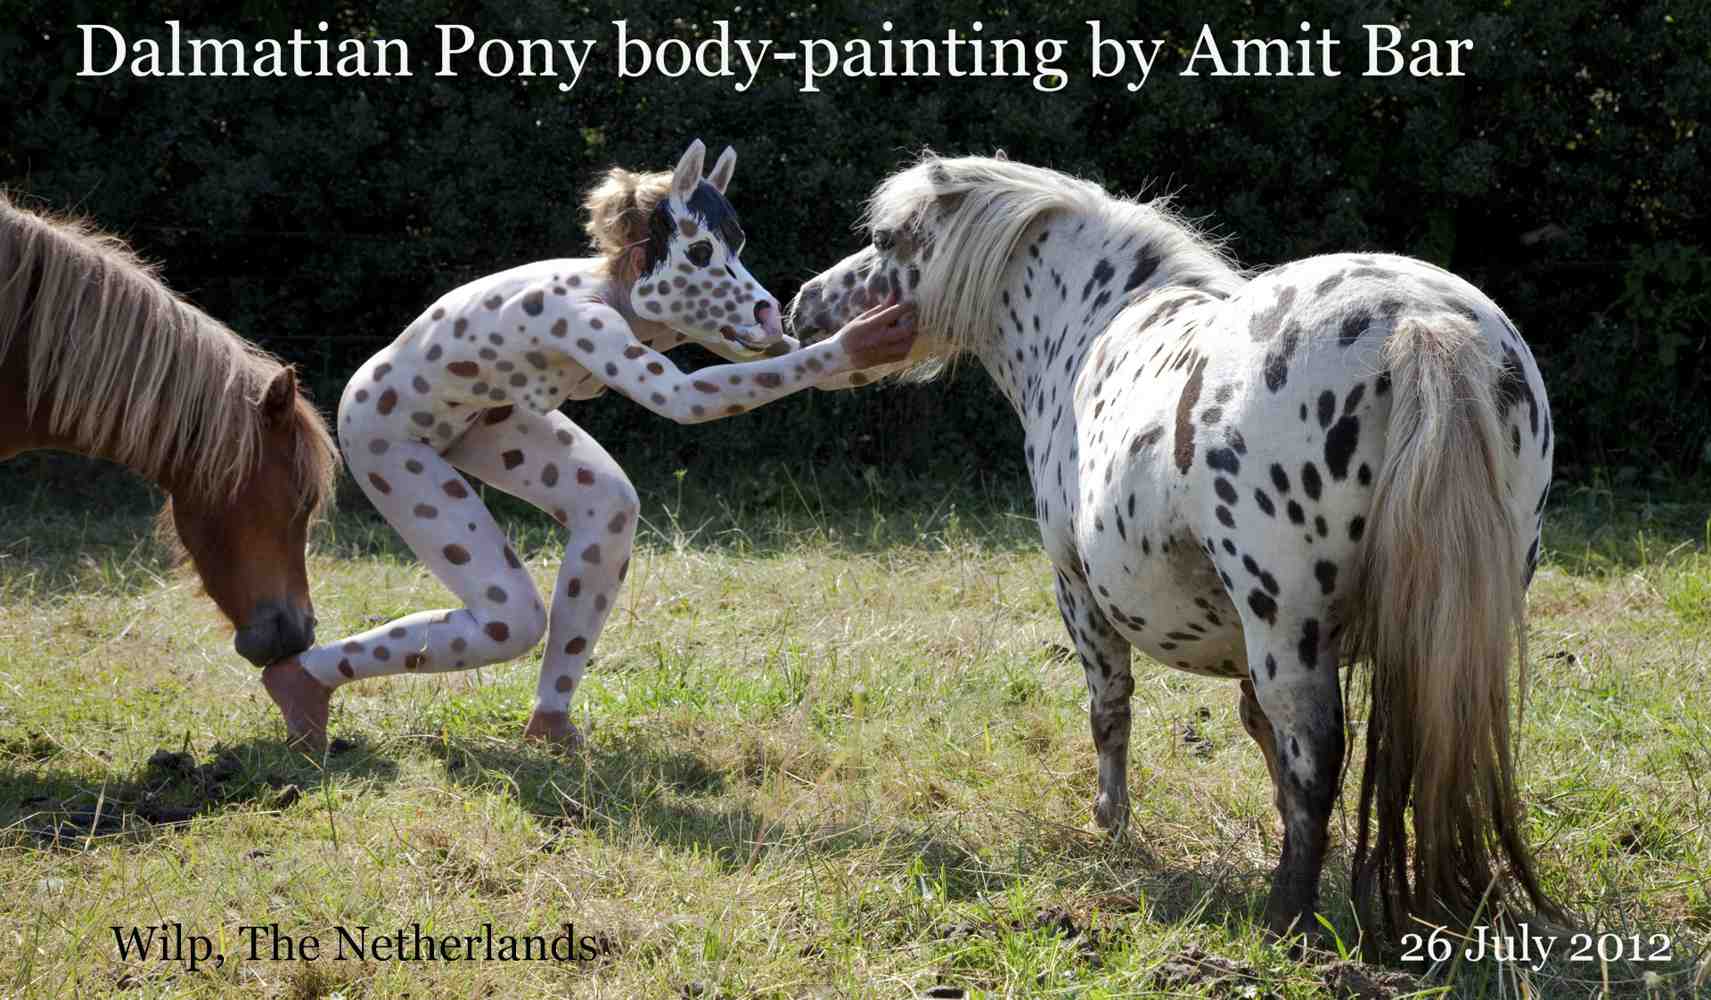 Dalmatian Pony video: This bodypainting is based on the special pattern of the pony horse featured in this video.
The pony's pattern looks more like the pattern of a Damatian dog than that of a 'regular' pony.
Unfortunately, this pony wasn't very eager to to cooperate and when she finaly did, love for the arts was not her primary incentive...